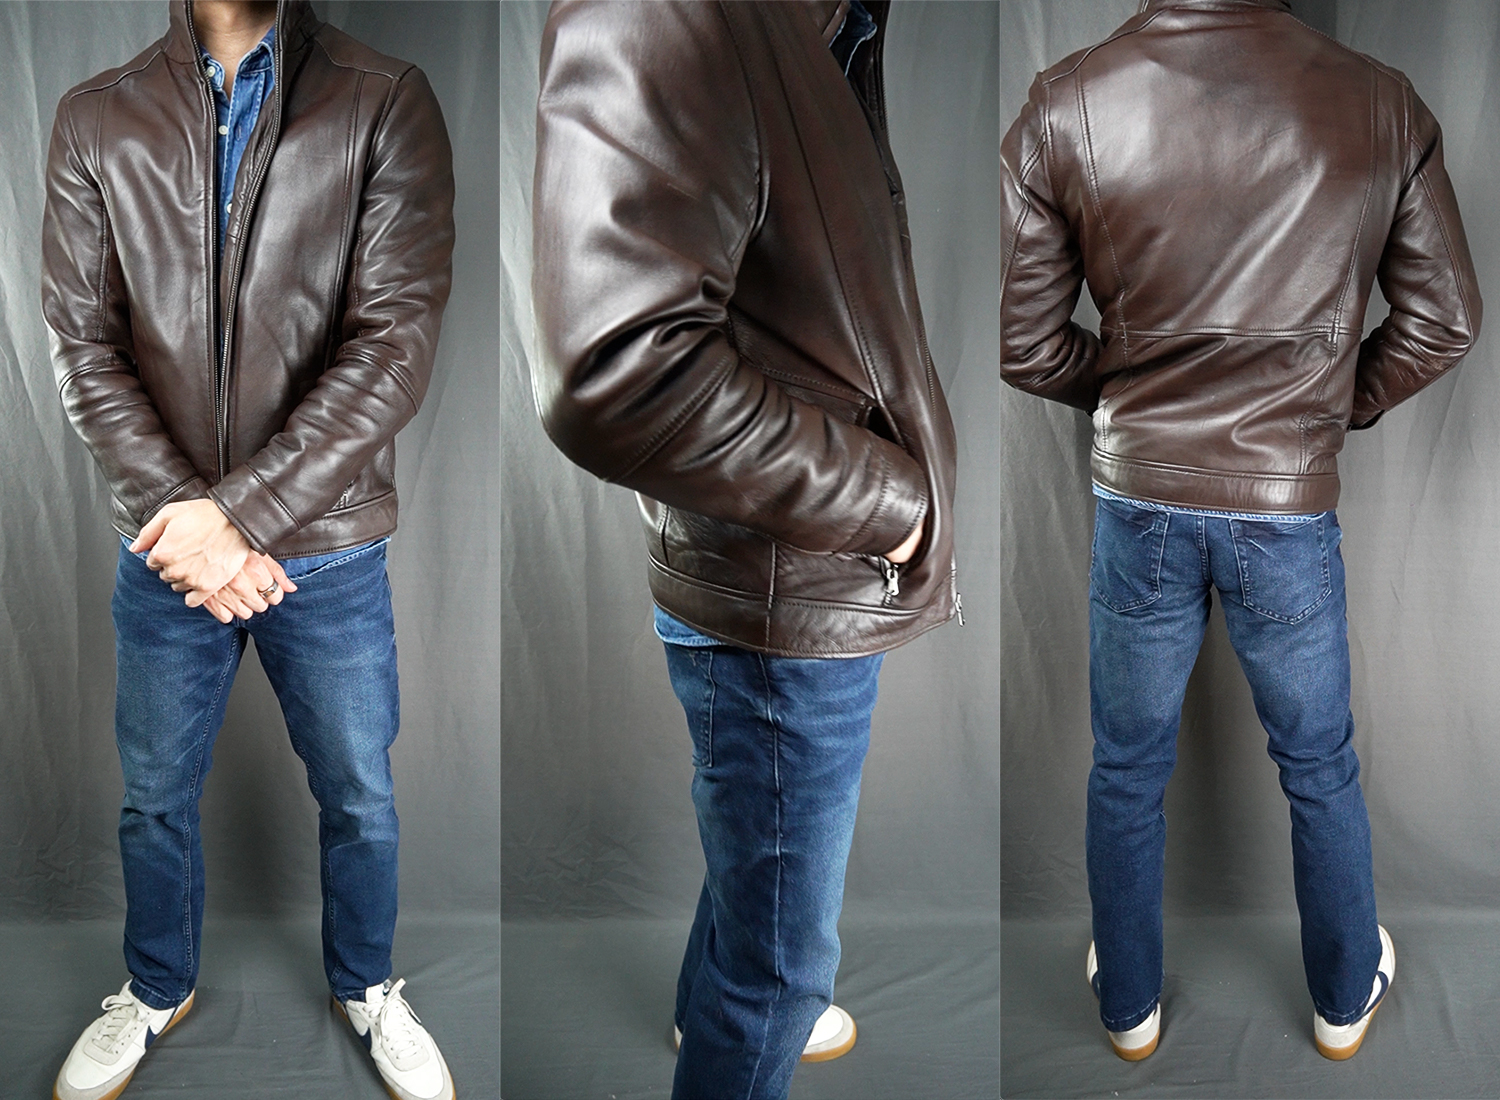 peter manning lambskin leather jacket how it fits